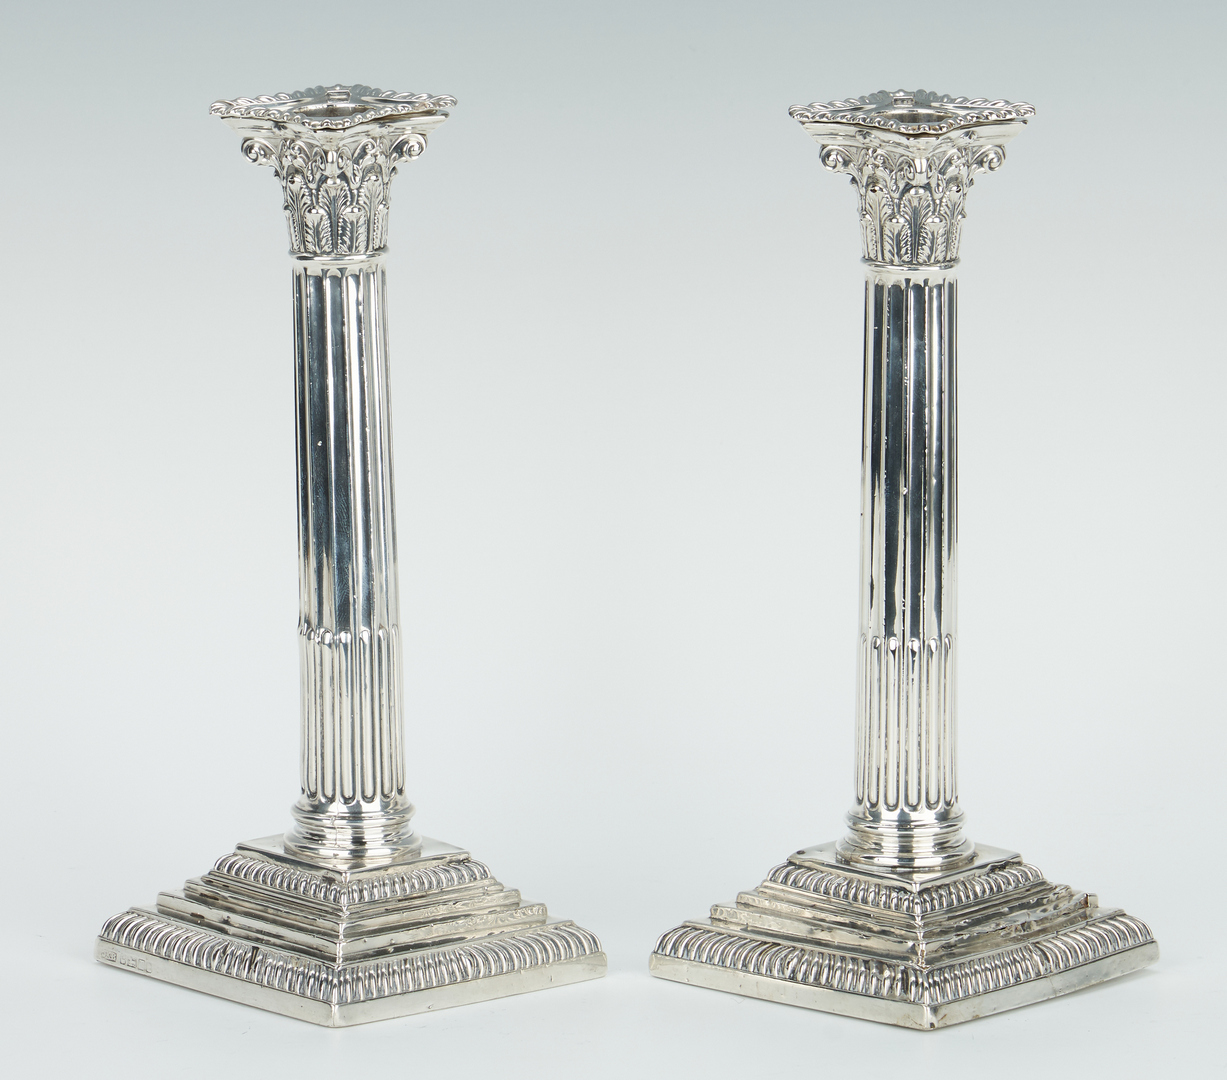 Lot 246: 13 Sterling Silver Items, incl. Candlesticks & Salts